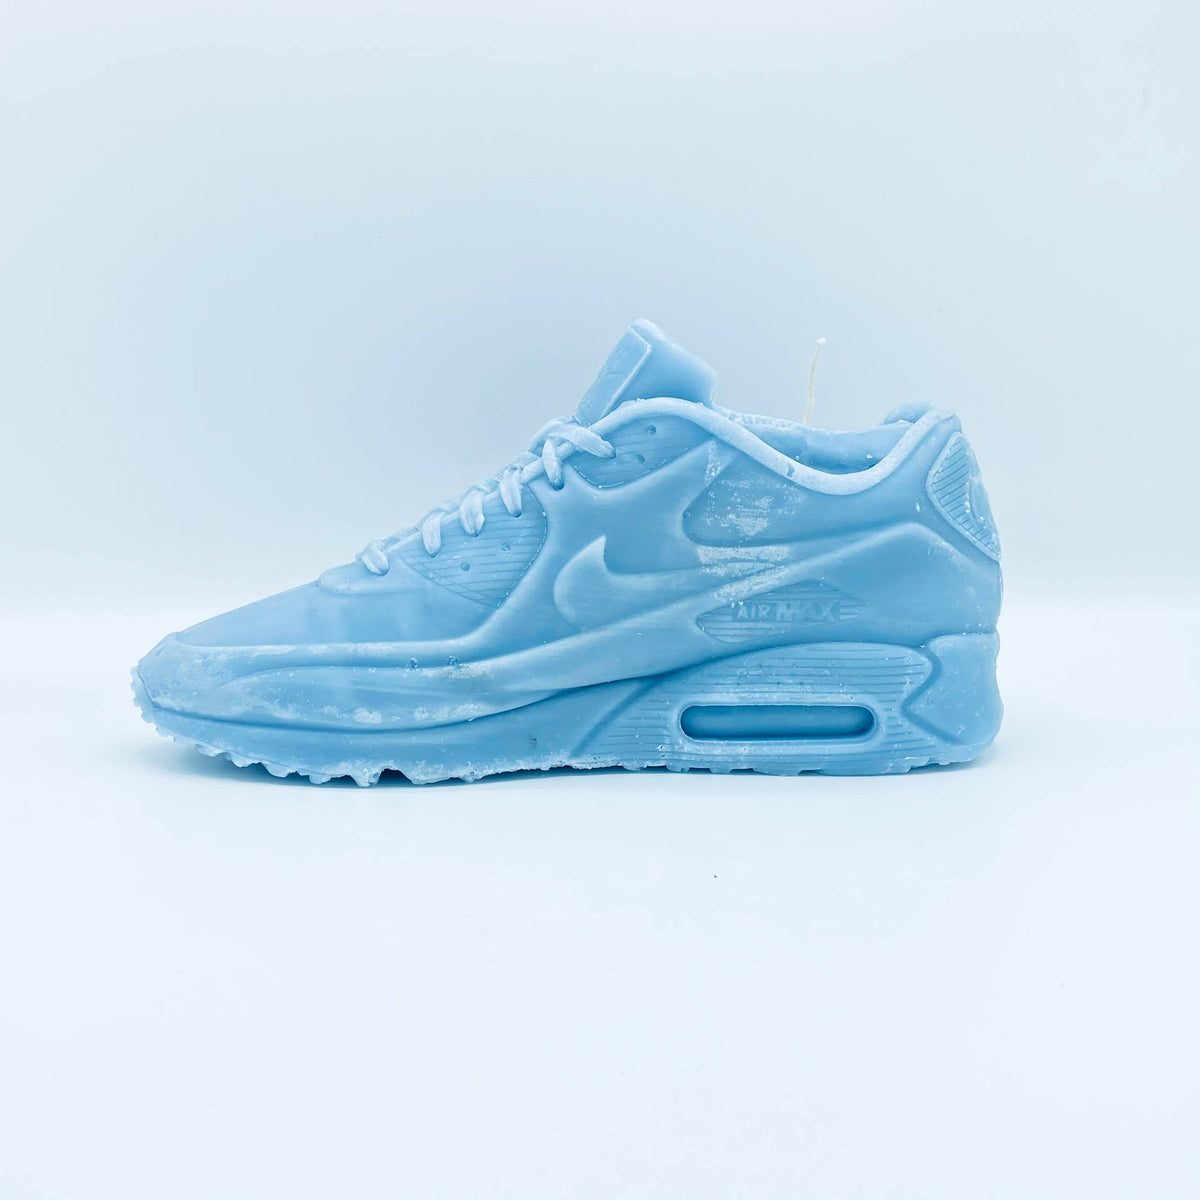 Candle model Air max 90